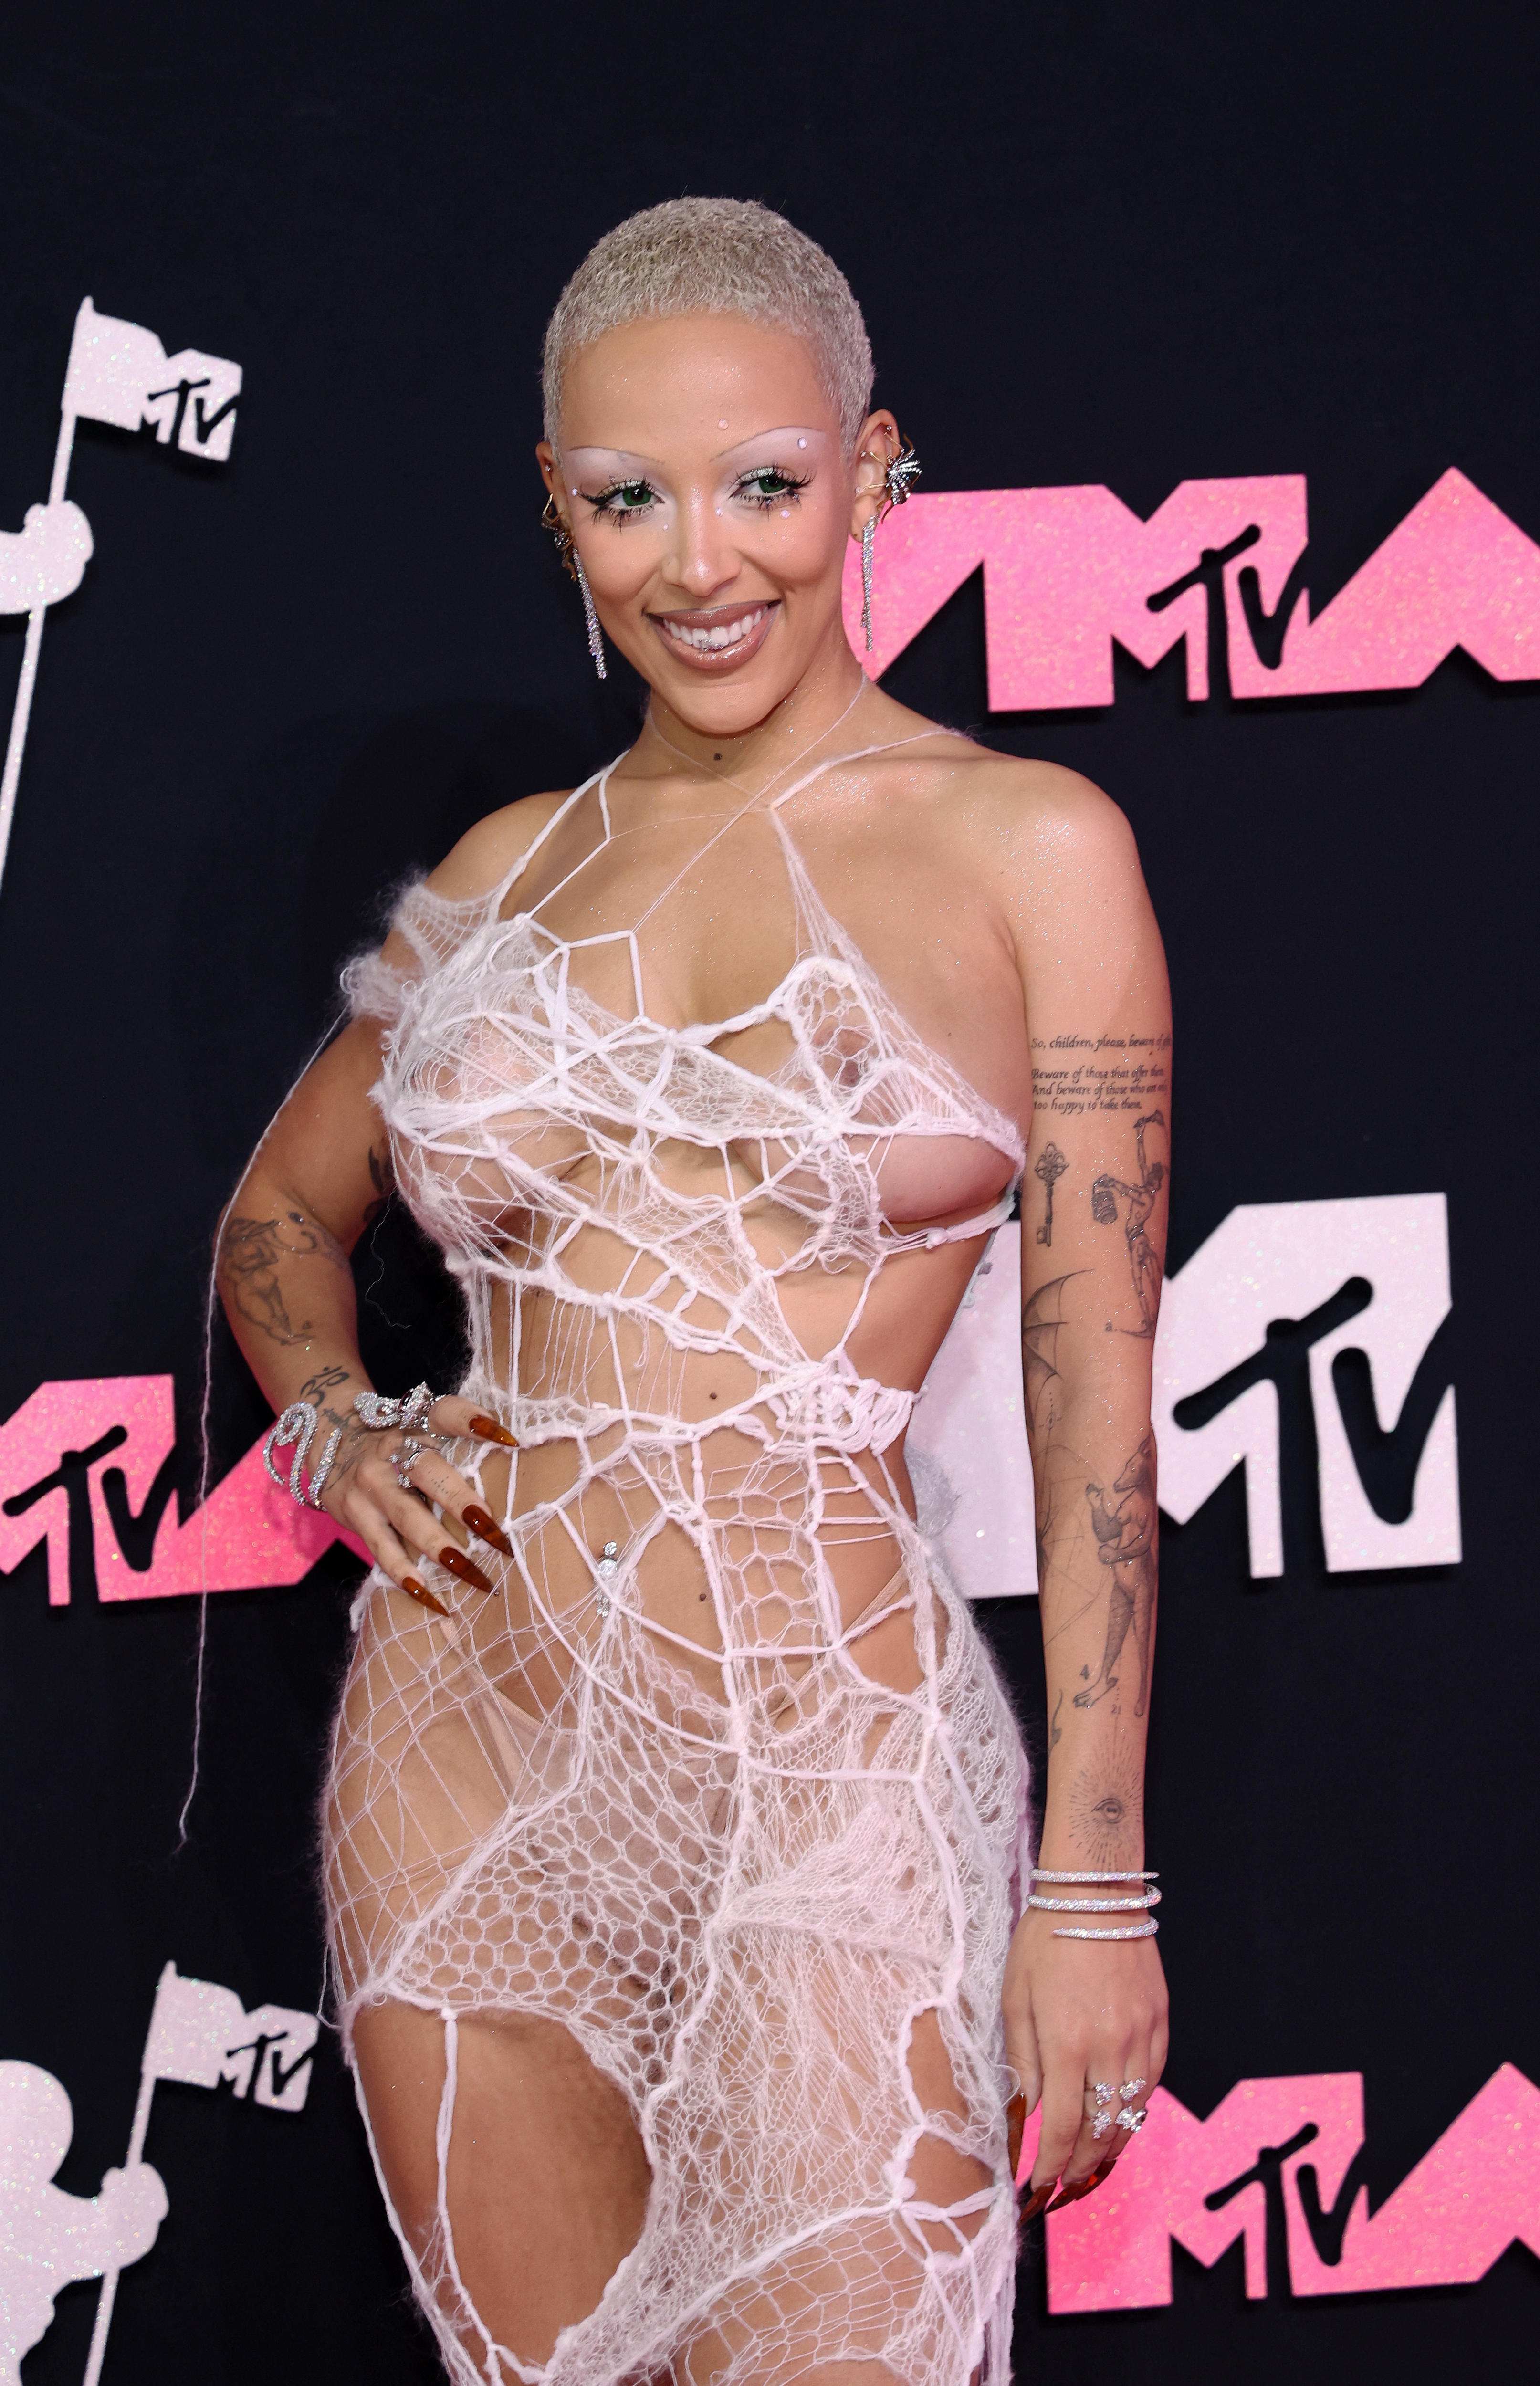 Doja Cat is pictured on a red carpet wearing a spiderweb-like dress. She smiles with one hand on her hip.